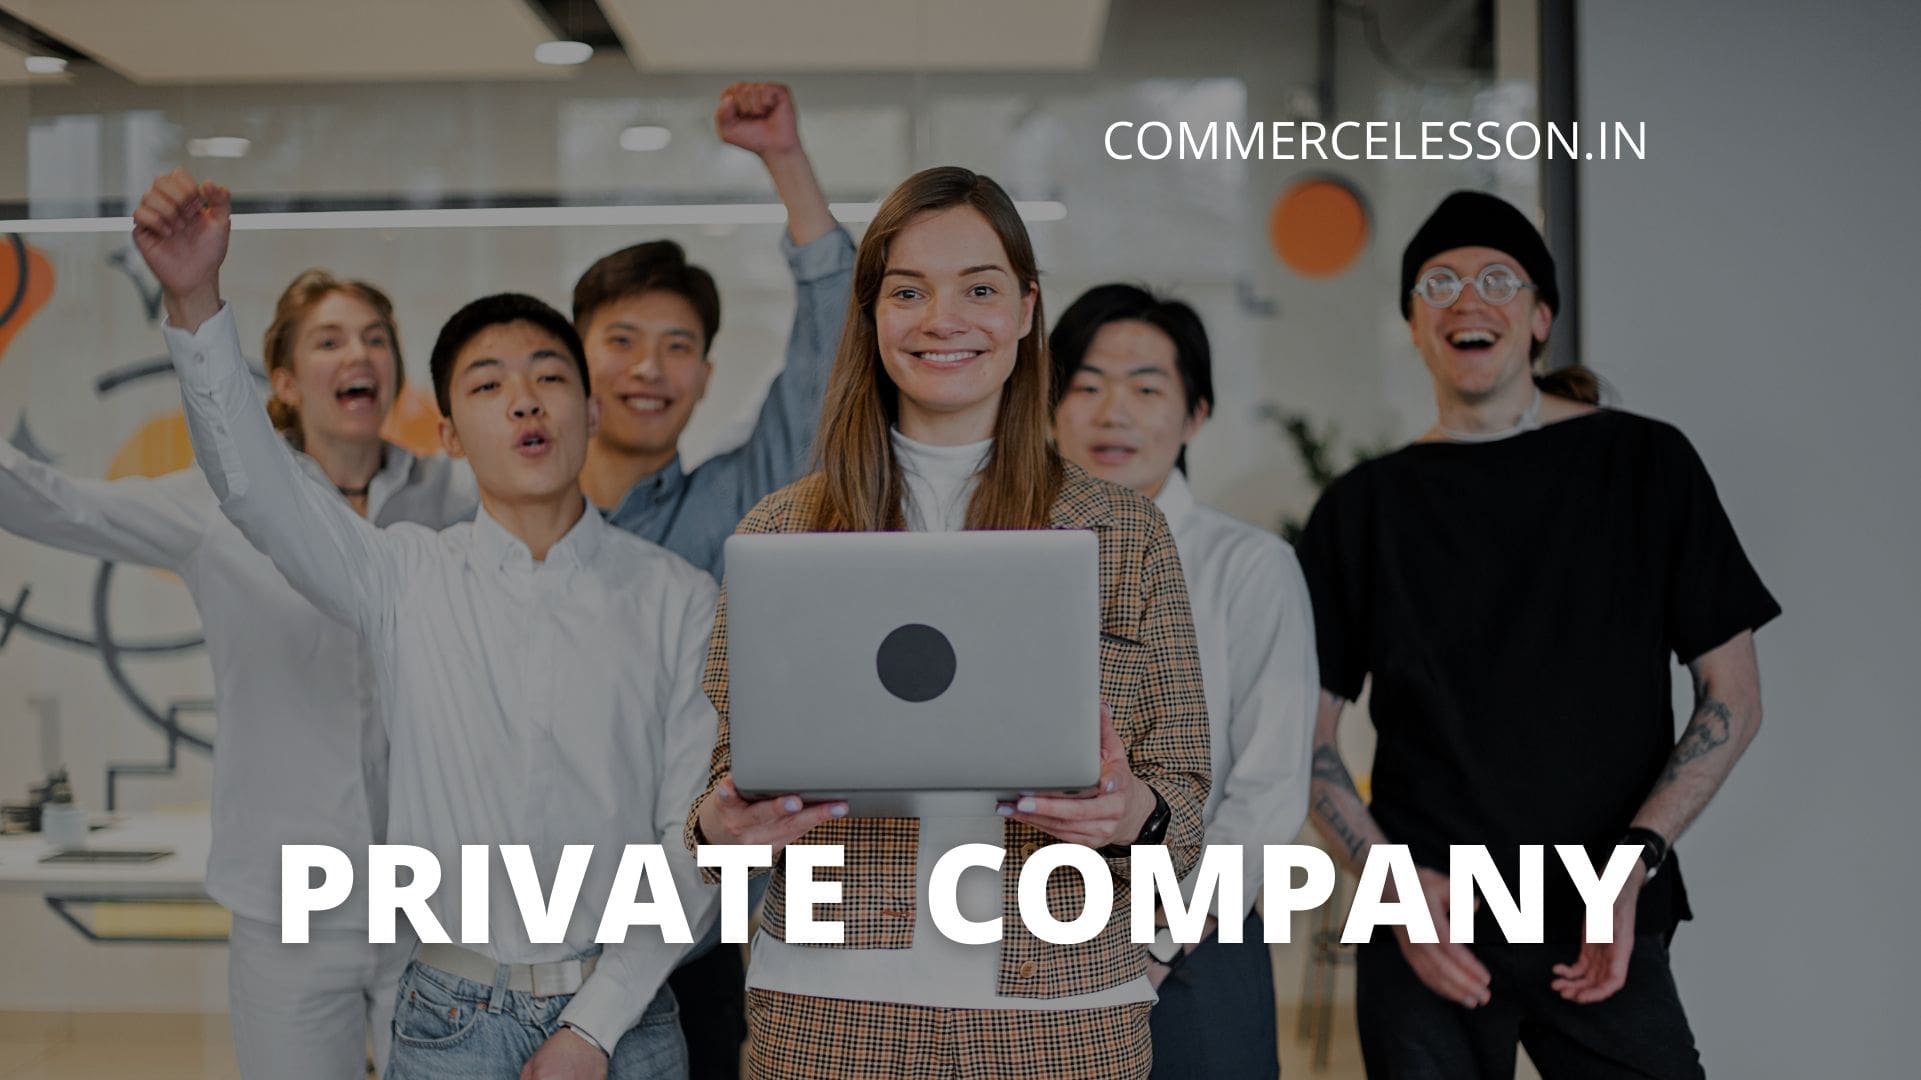 Private Company Its Privileges and Exemptions